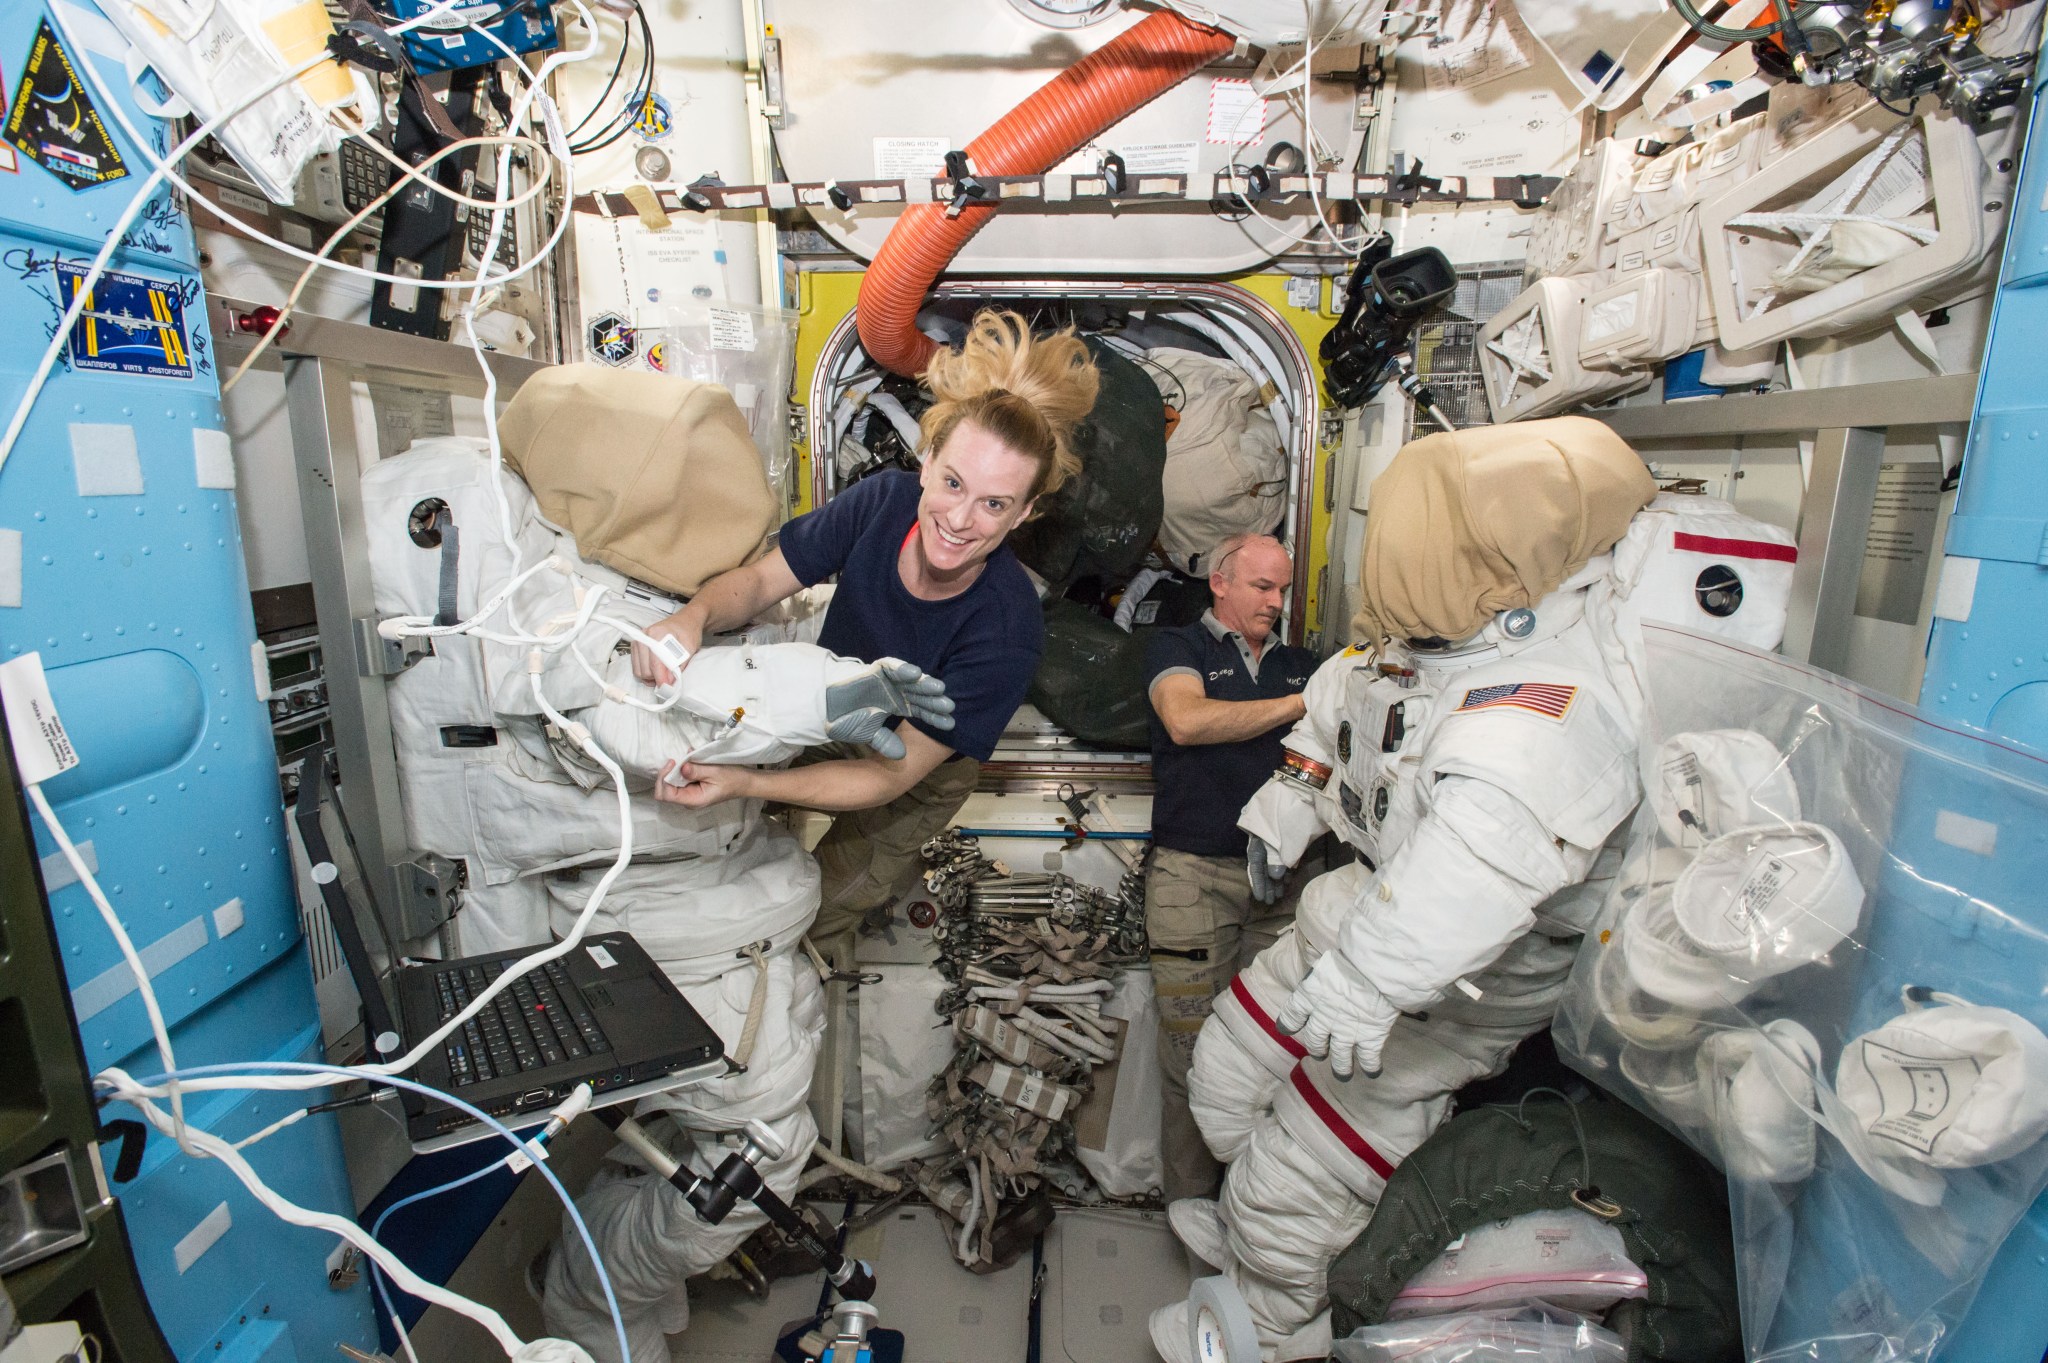 Astronauts Kate Rubins and Jeff Williams inside airlock, examining spacesuits